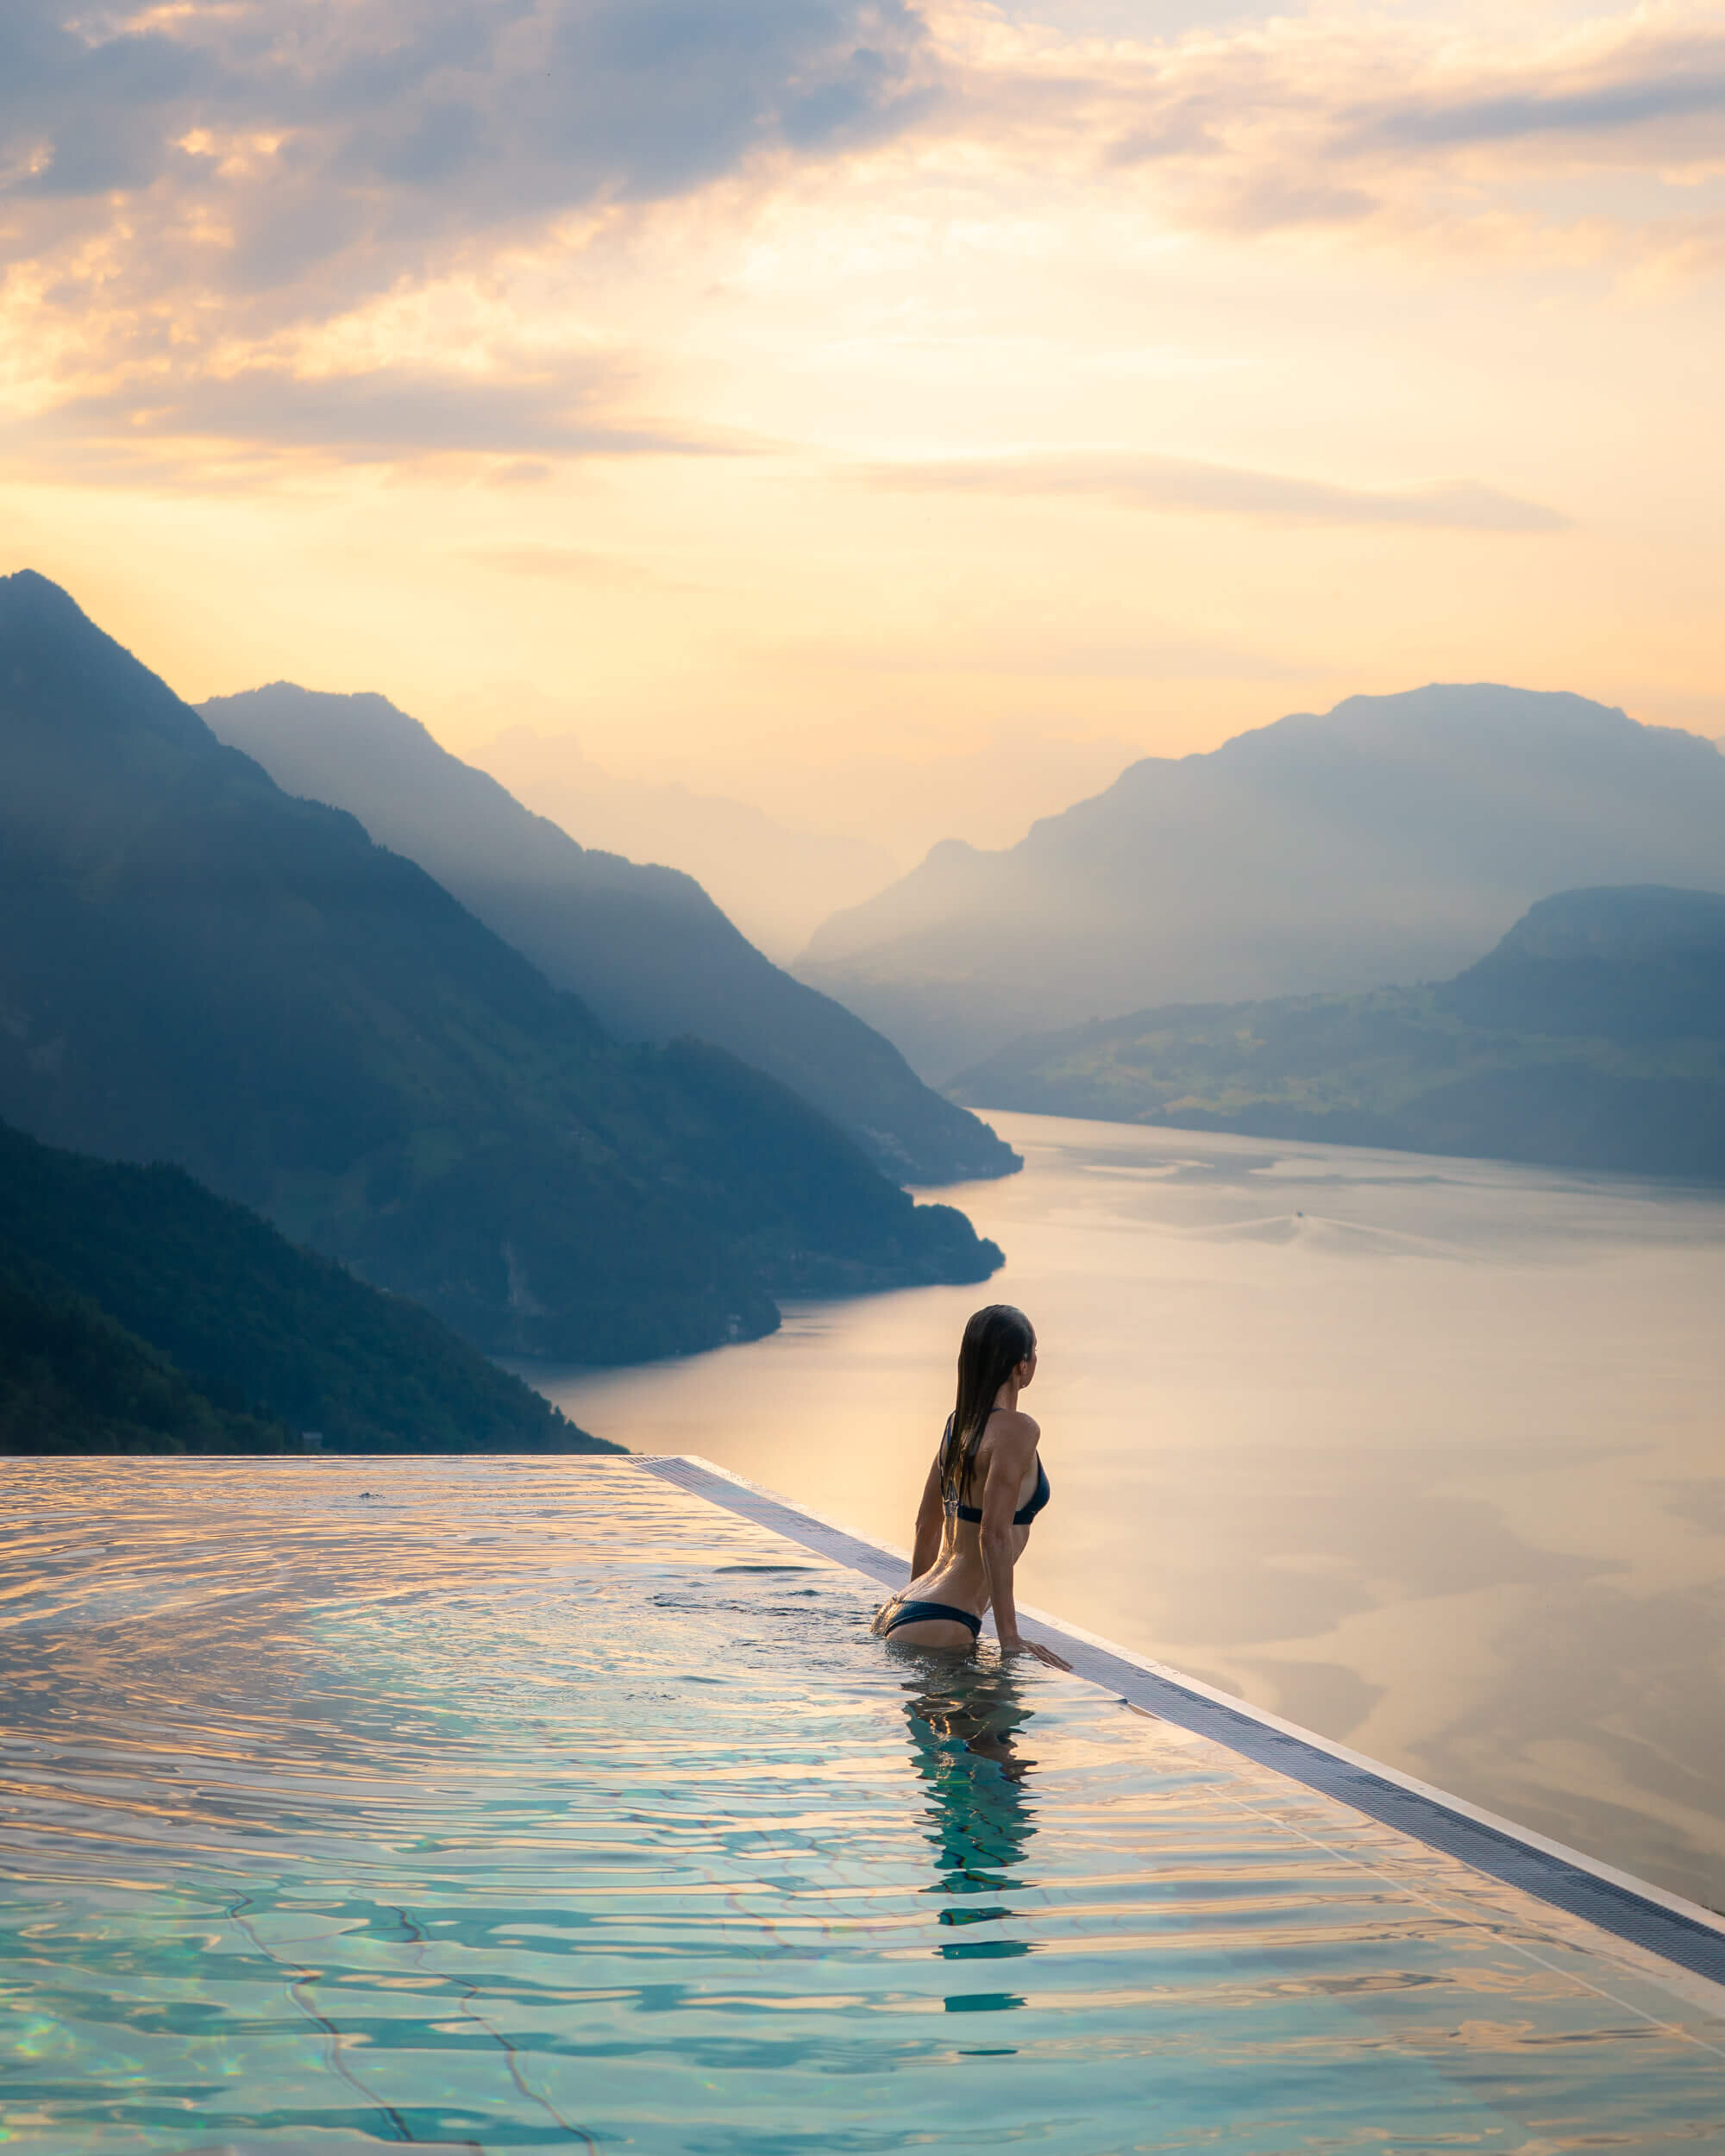 Watching the sun come up over the mountains from the pool at Villa Honegg in Switzerland.